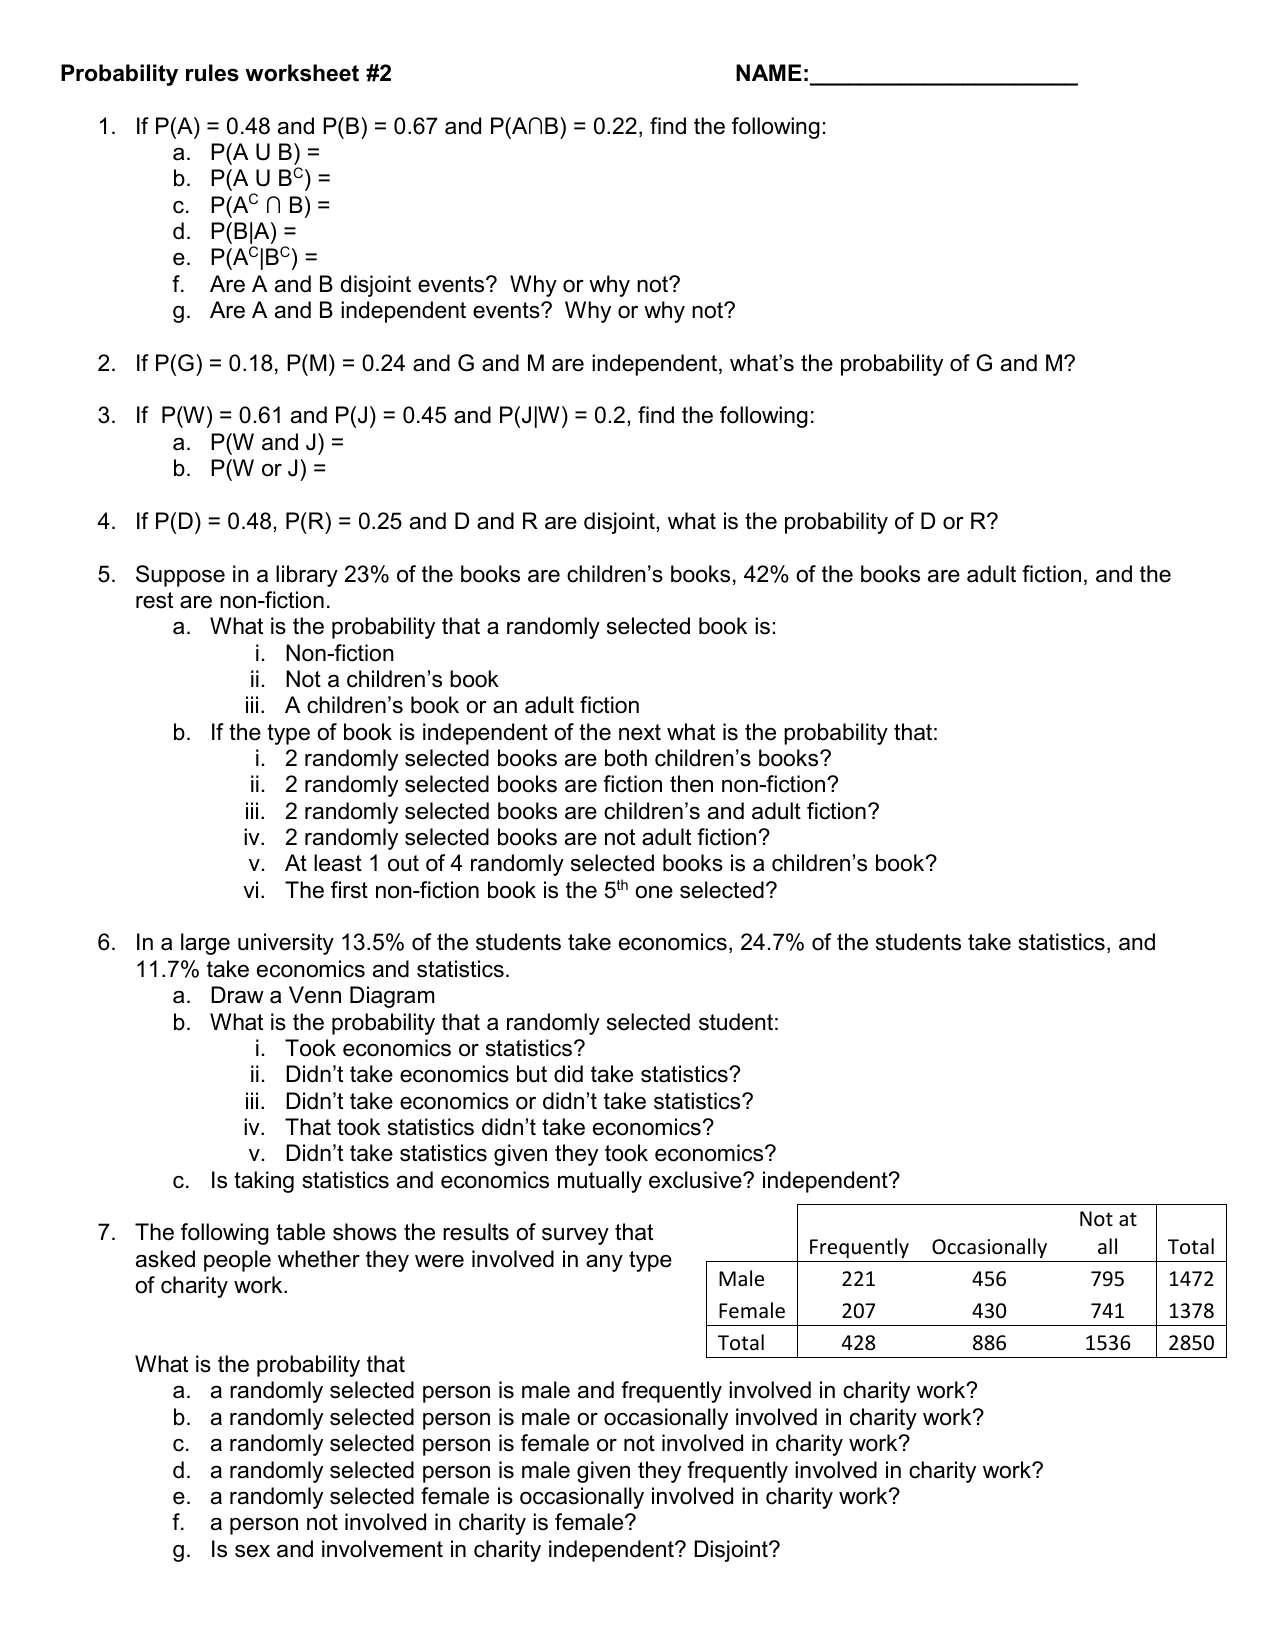 Addition Rules For Probability Worksheet Answer Key - Rick Sanchez's